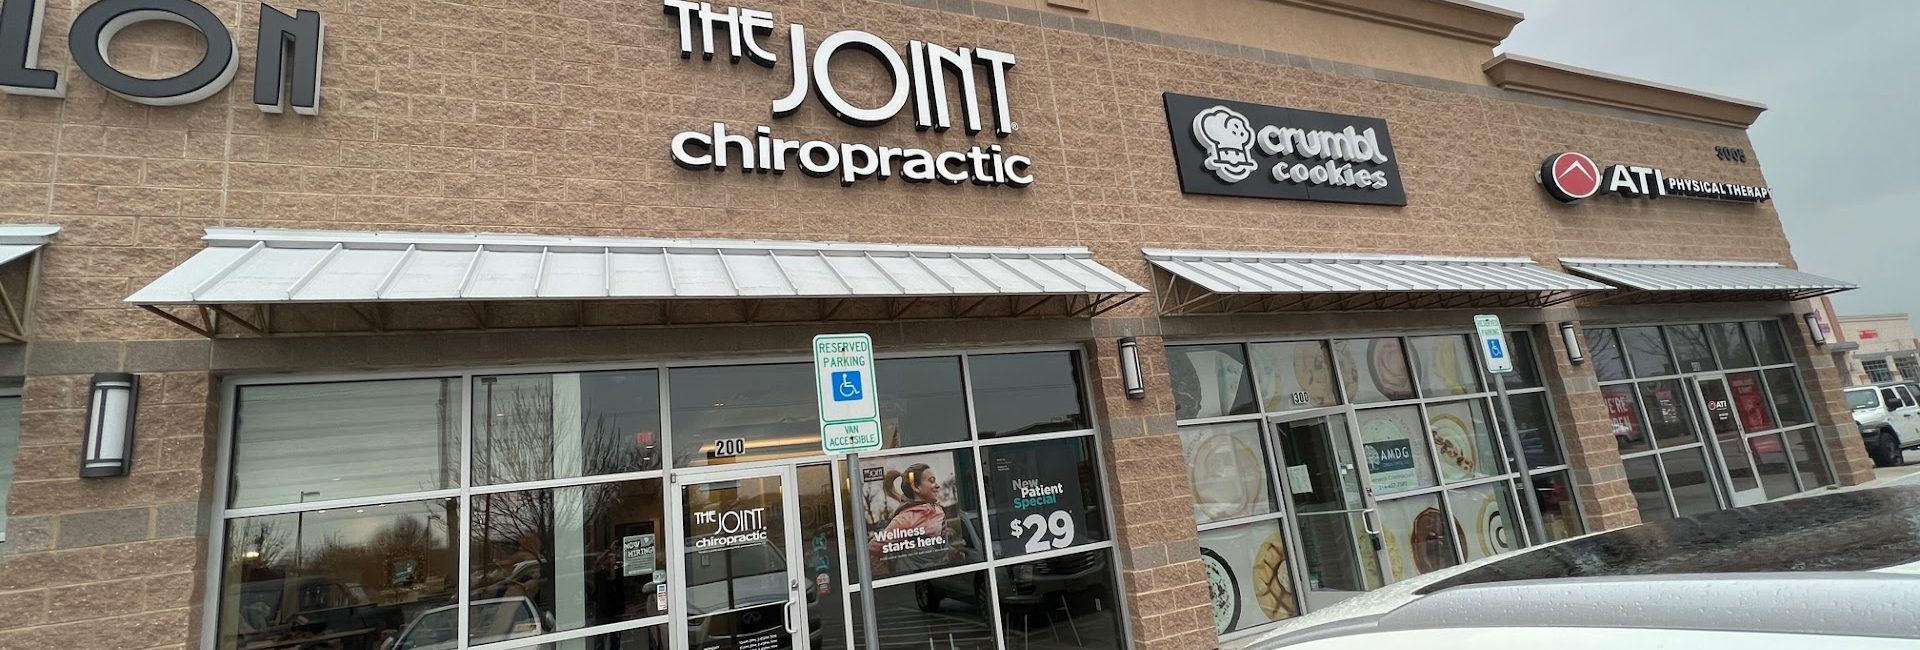 The Joint Chiropractic 6